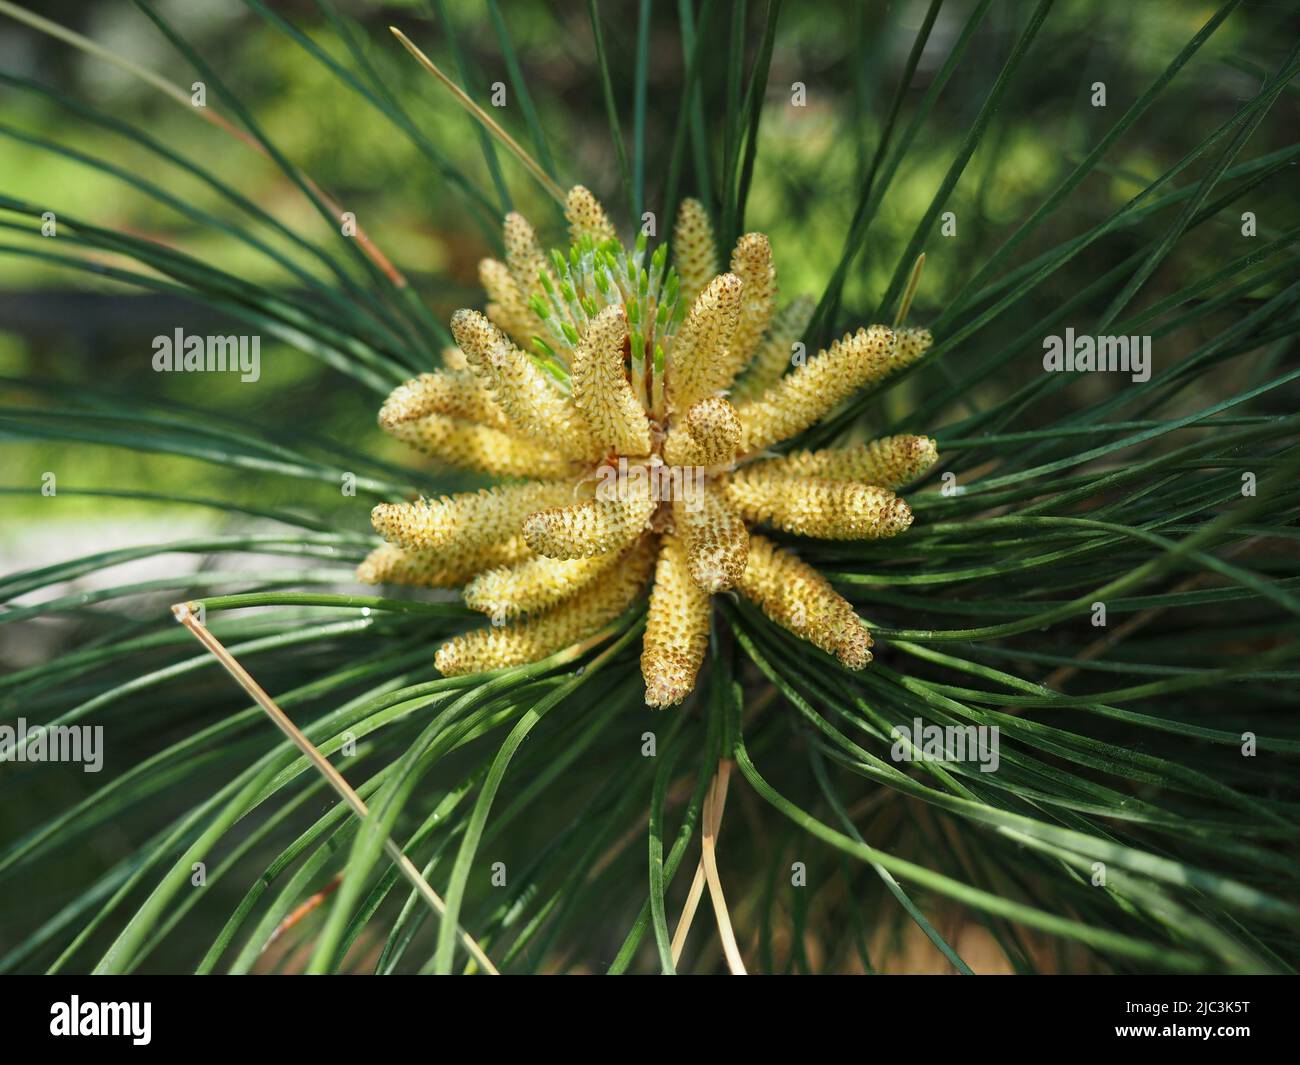 Young cones and needles of a pine tree in early Spring in Ottawa, Ontario, Canada. Stock Photo